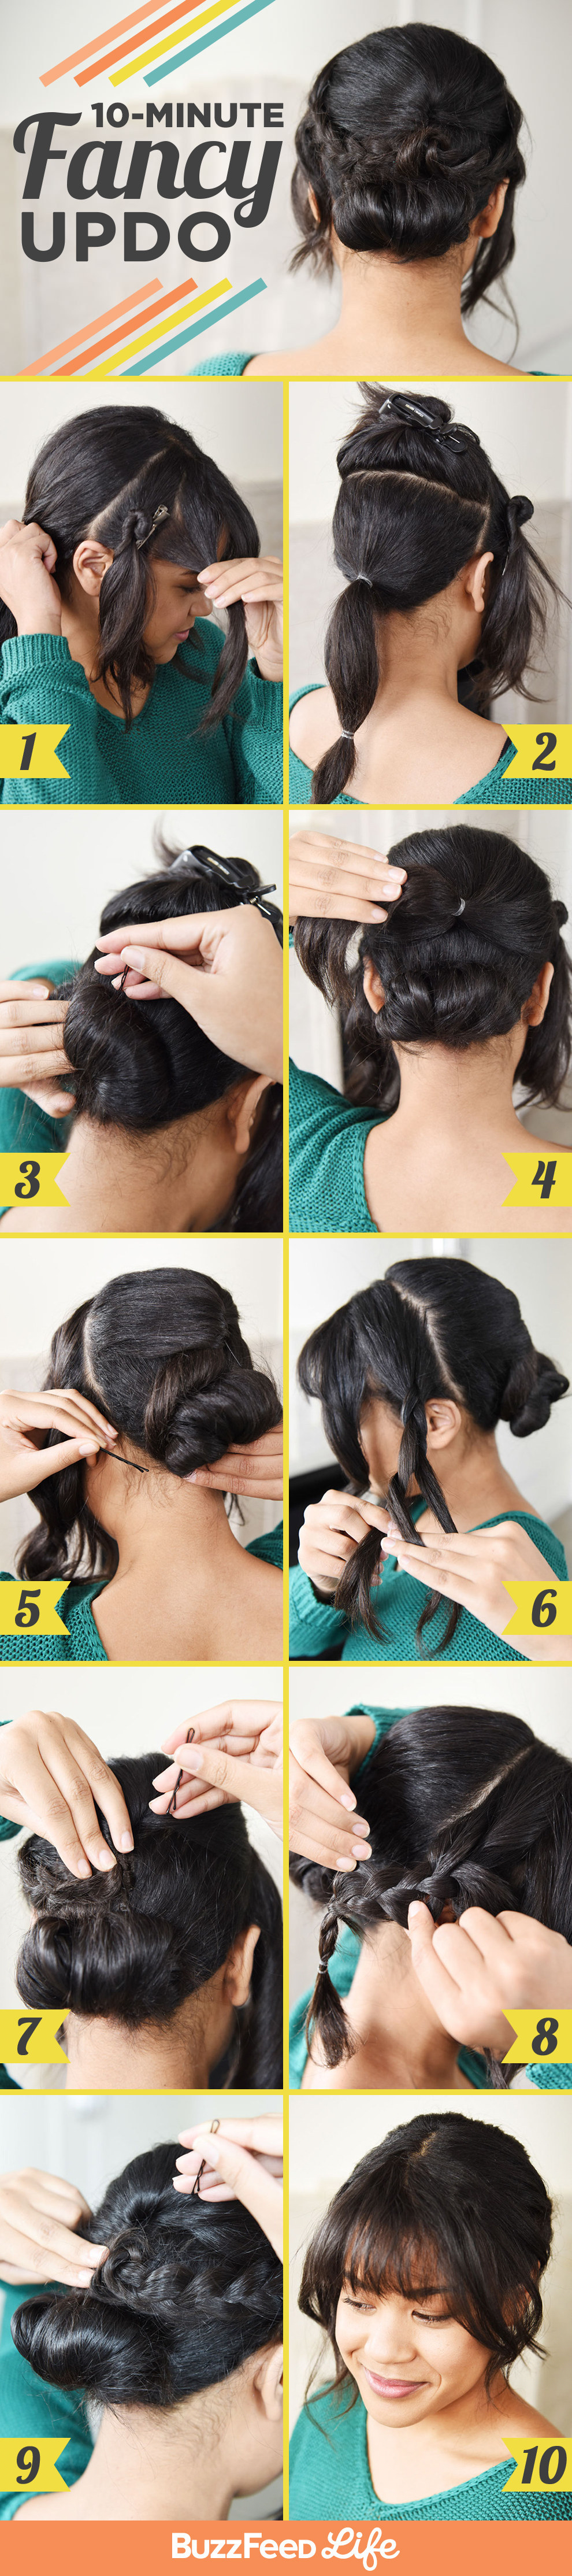 50+ Braided Hairstyles To Try Right Now : Fishtail Fancy